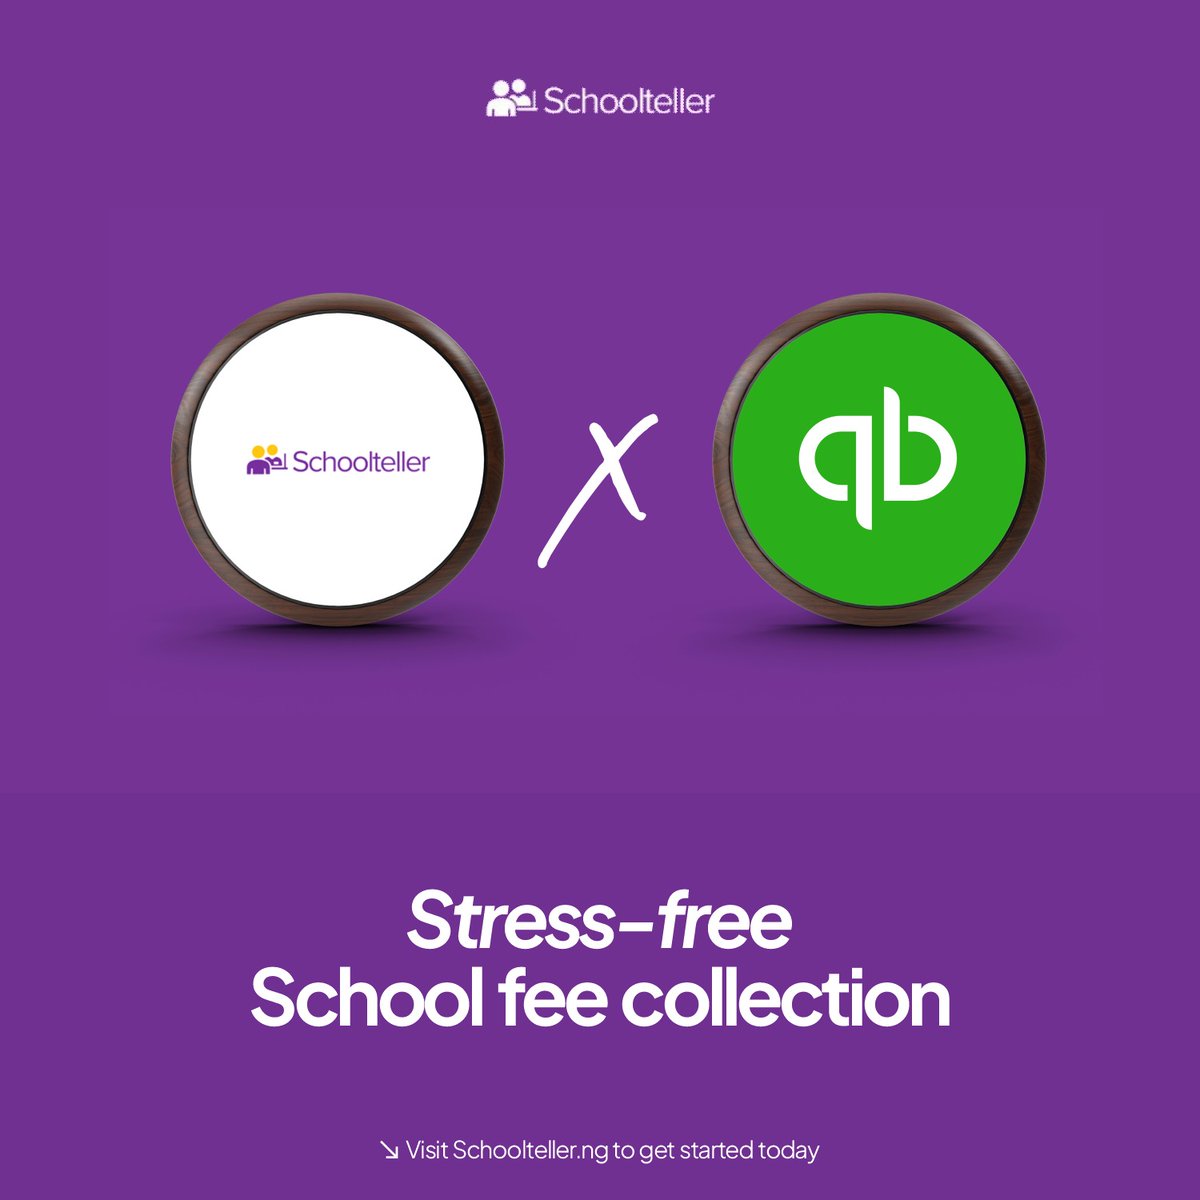 Our platform now integrates with Quickbook, making it even easier for schools to manage their finances and collect fees online.

Sign up your school today and experience the benefits for yourself!

#schoolmanagement #schoolleader #schoolteacher #education #nigerianschools